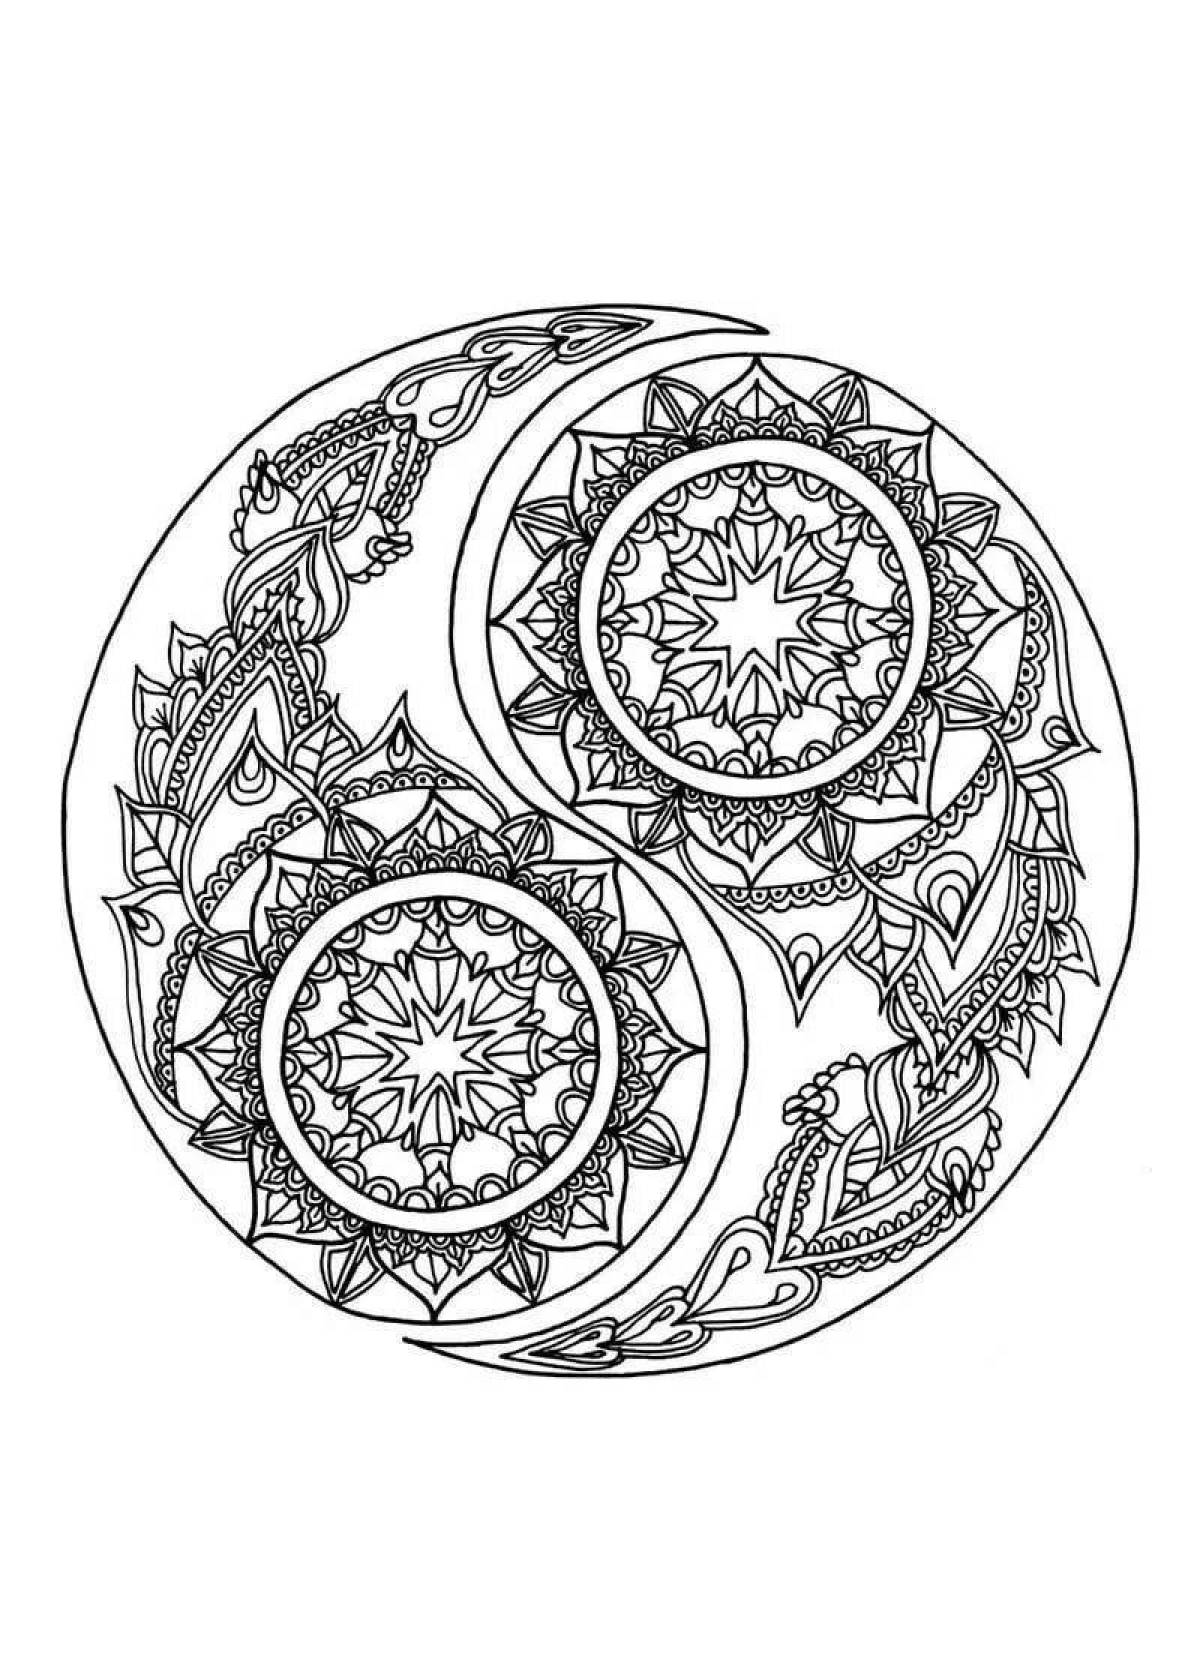 Amazing coloring book for all adult mandalas